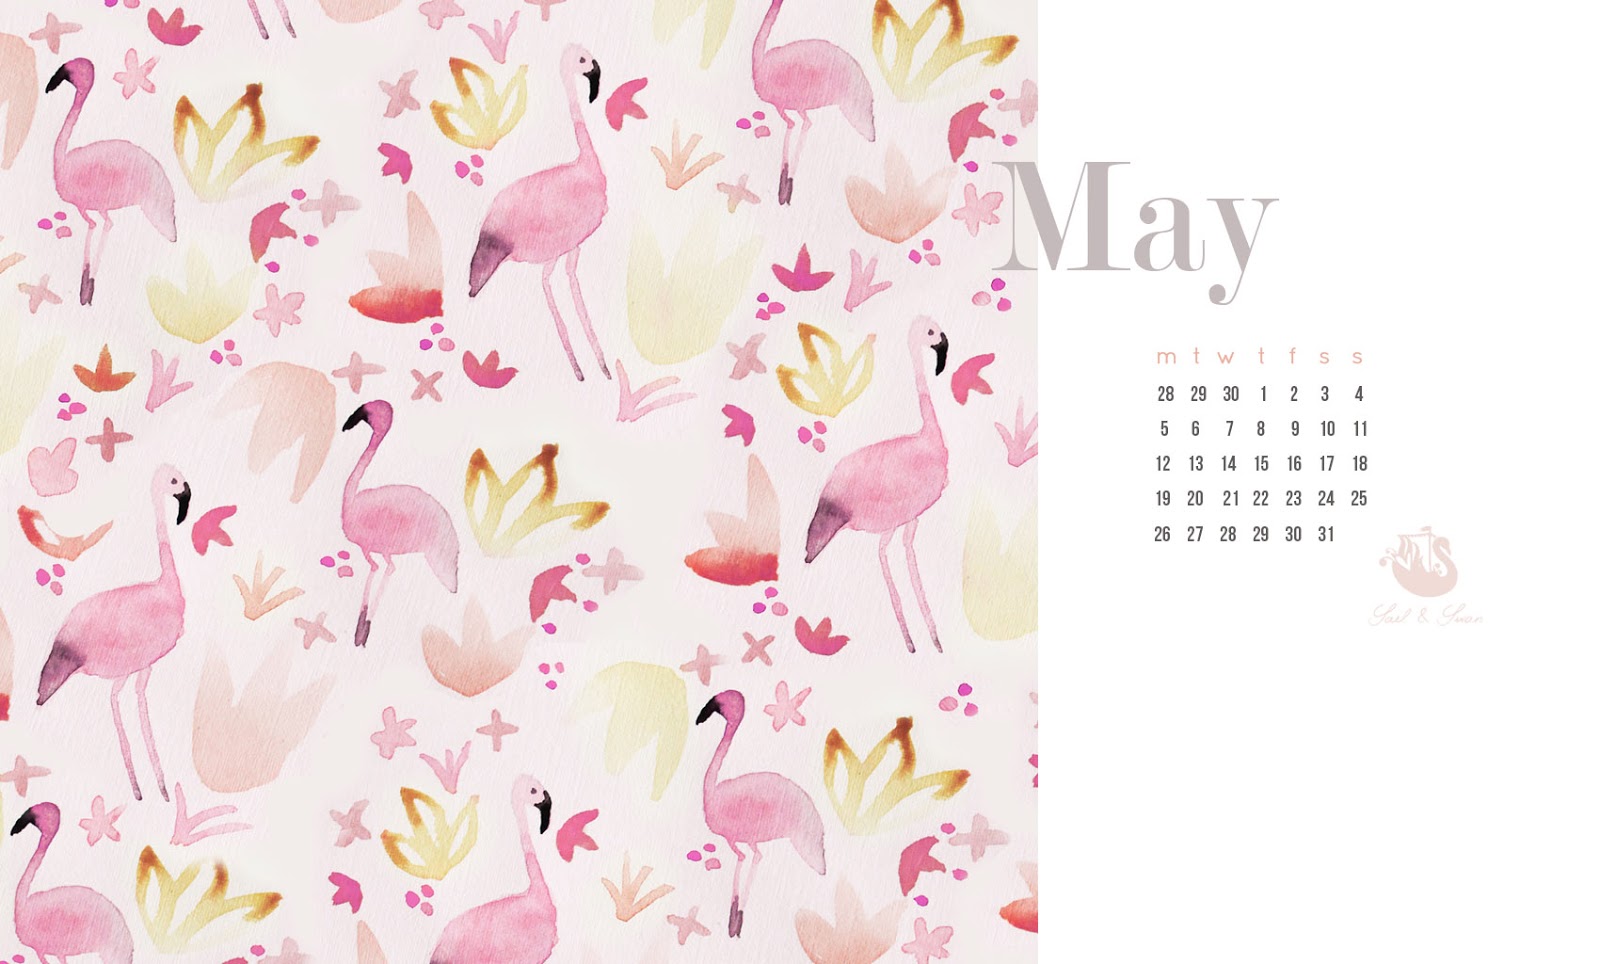 free desktop background watercolor painted pattern flamingos sail and